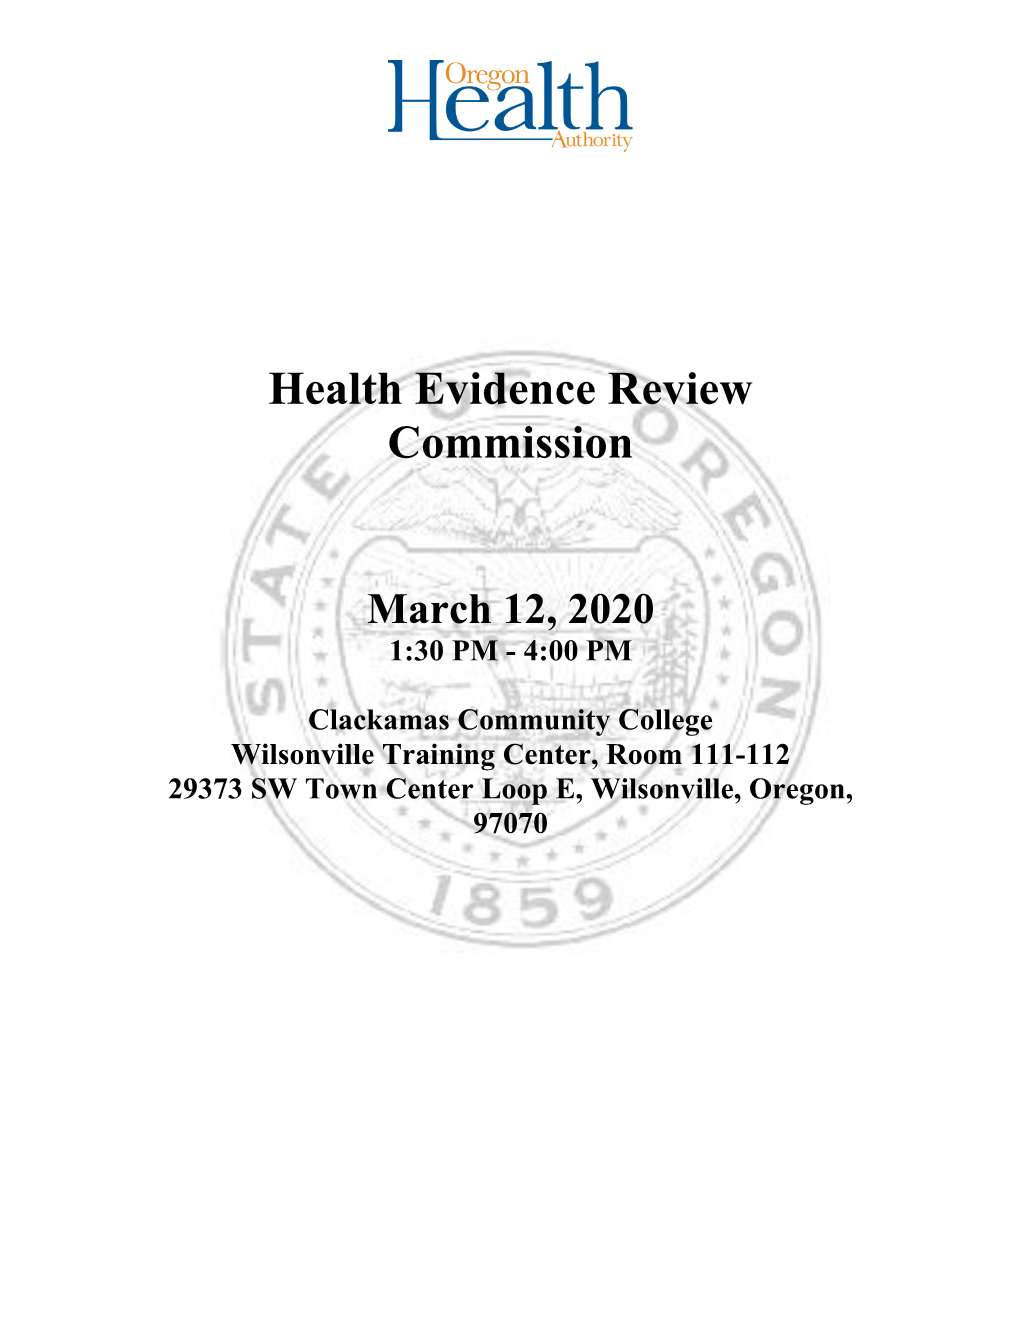 Health Evidence Review Commission